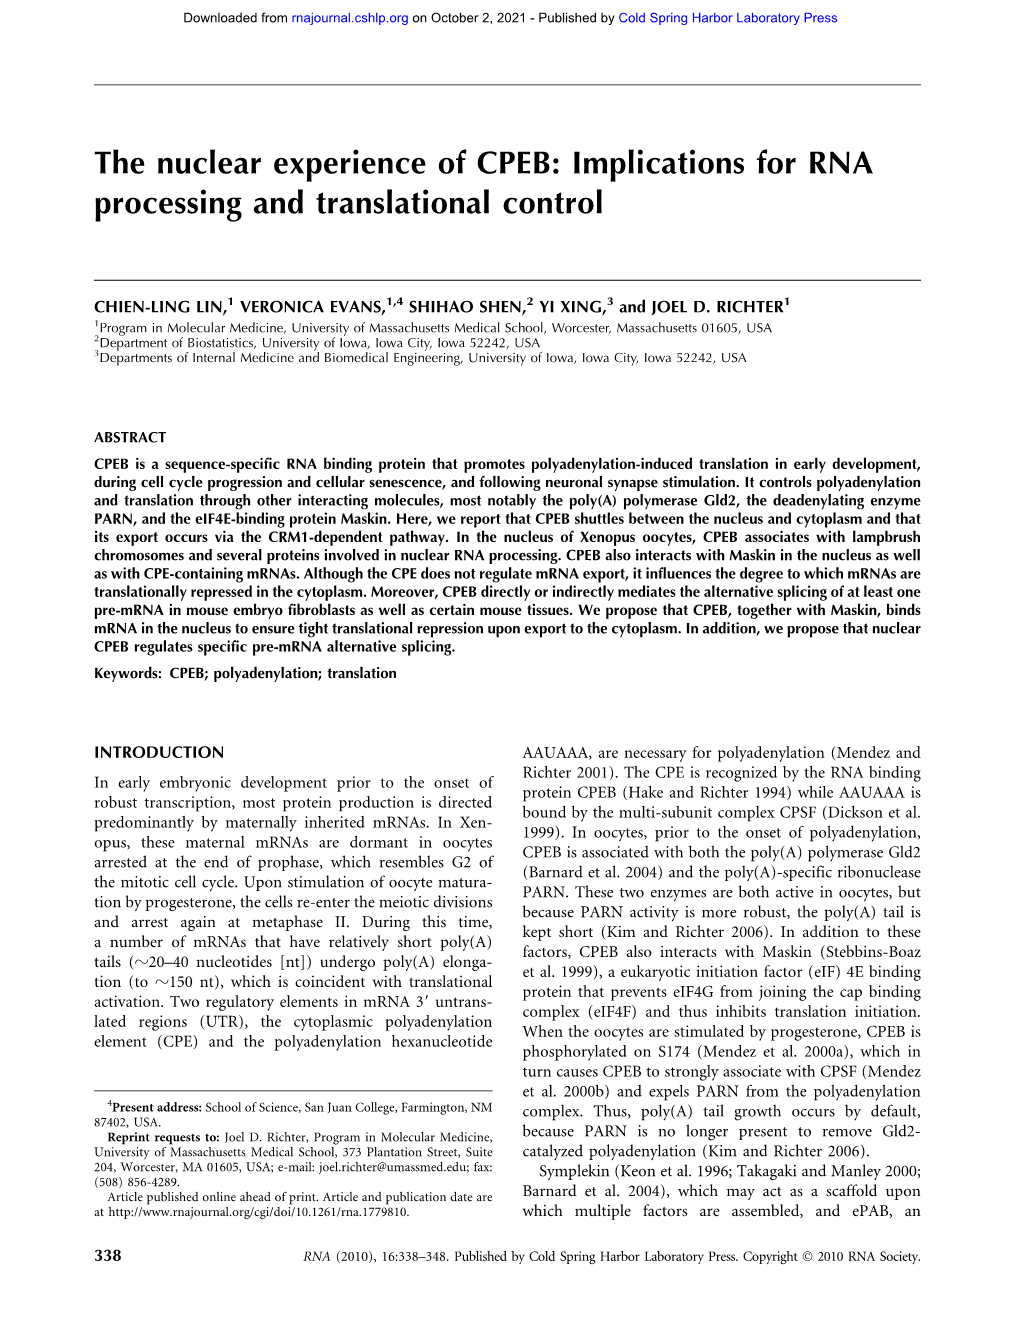 The Nuclear Experience of CPEB: Implications for RNA Processing and Translational Control